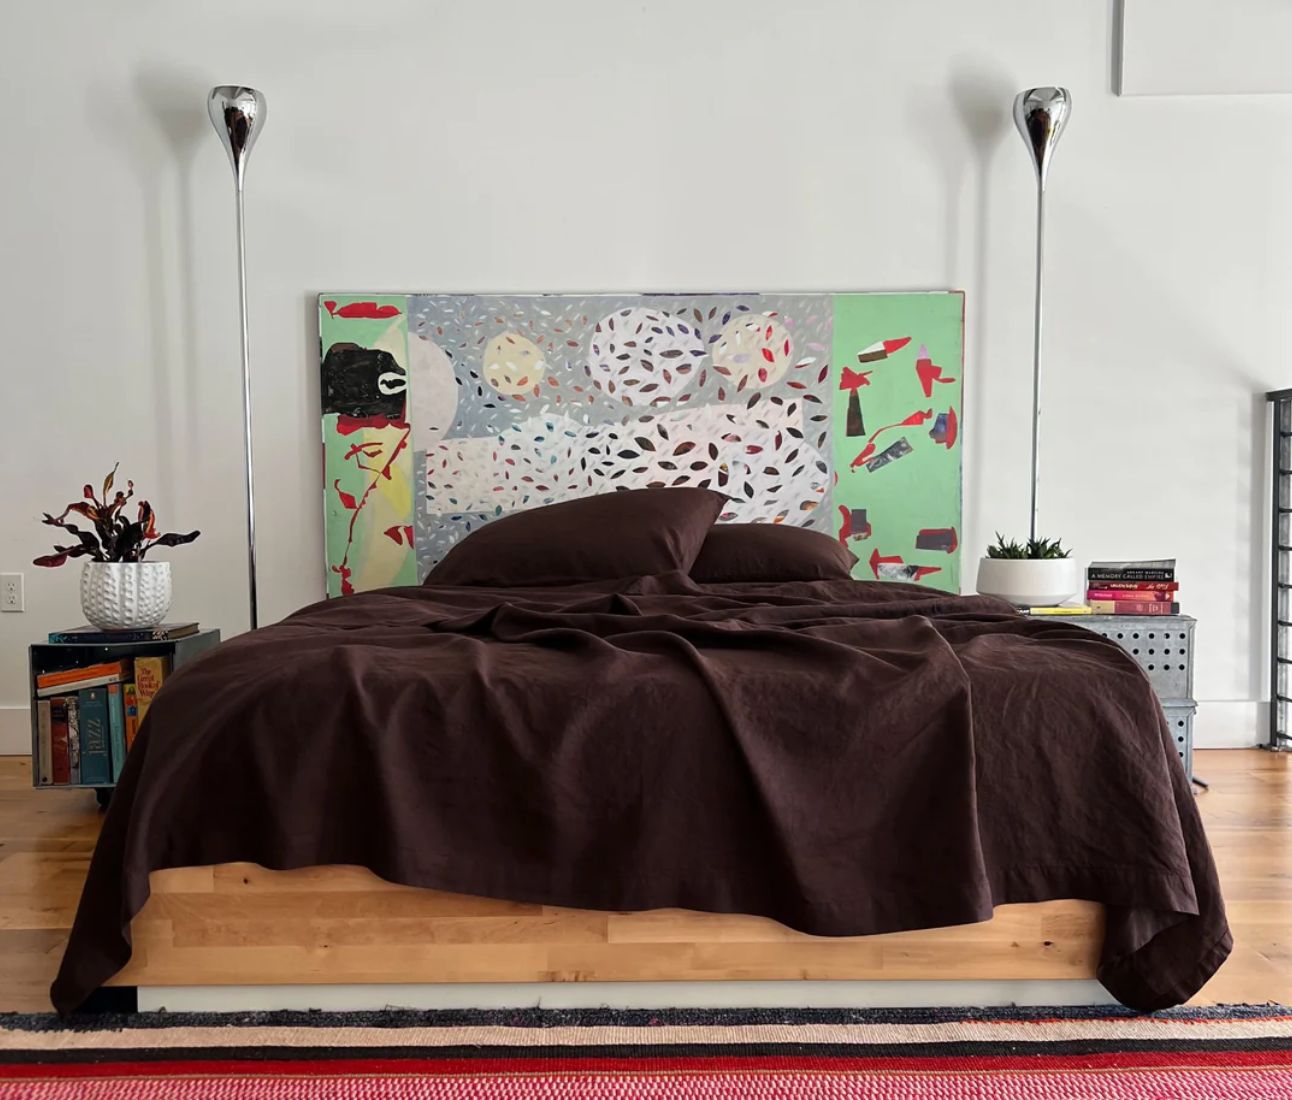 Bedroom with a large abstract painting above the bed, featuring a brown duvet cover and decorative floor lamps on either side